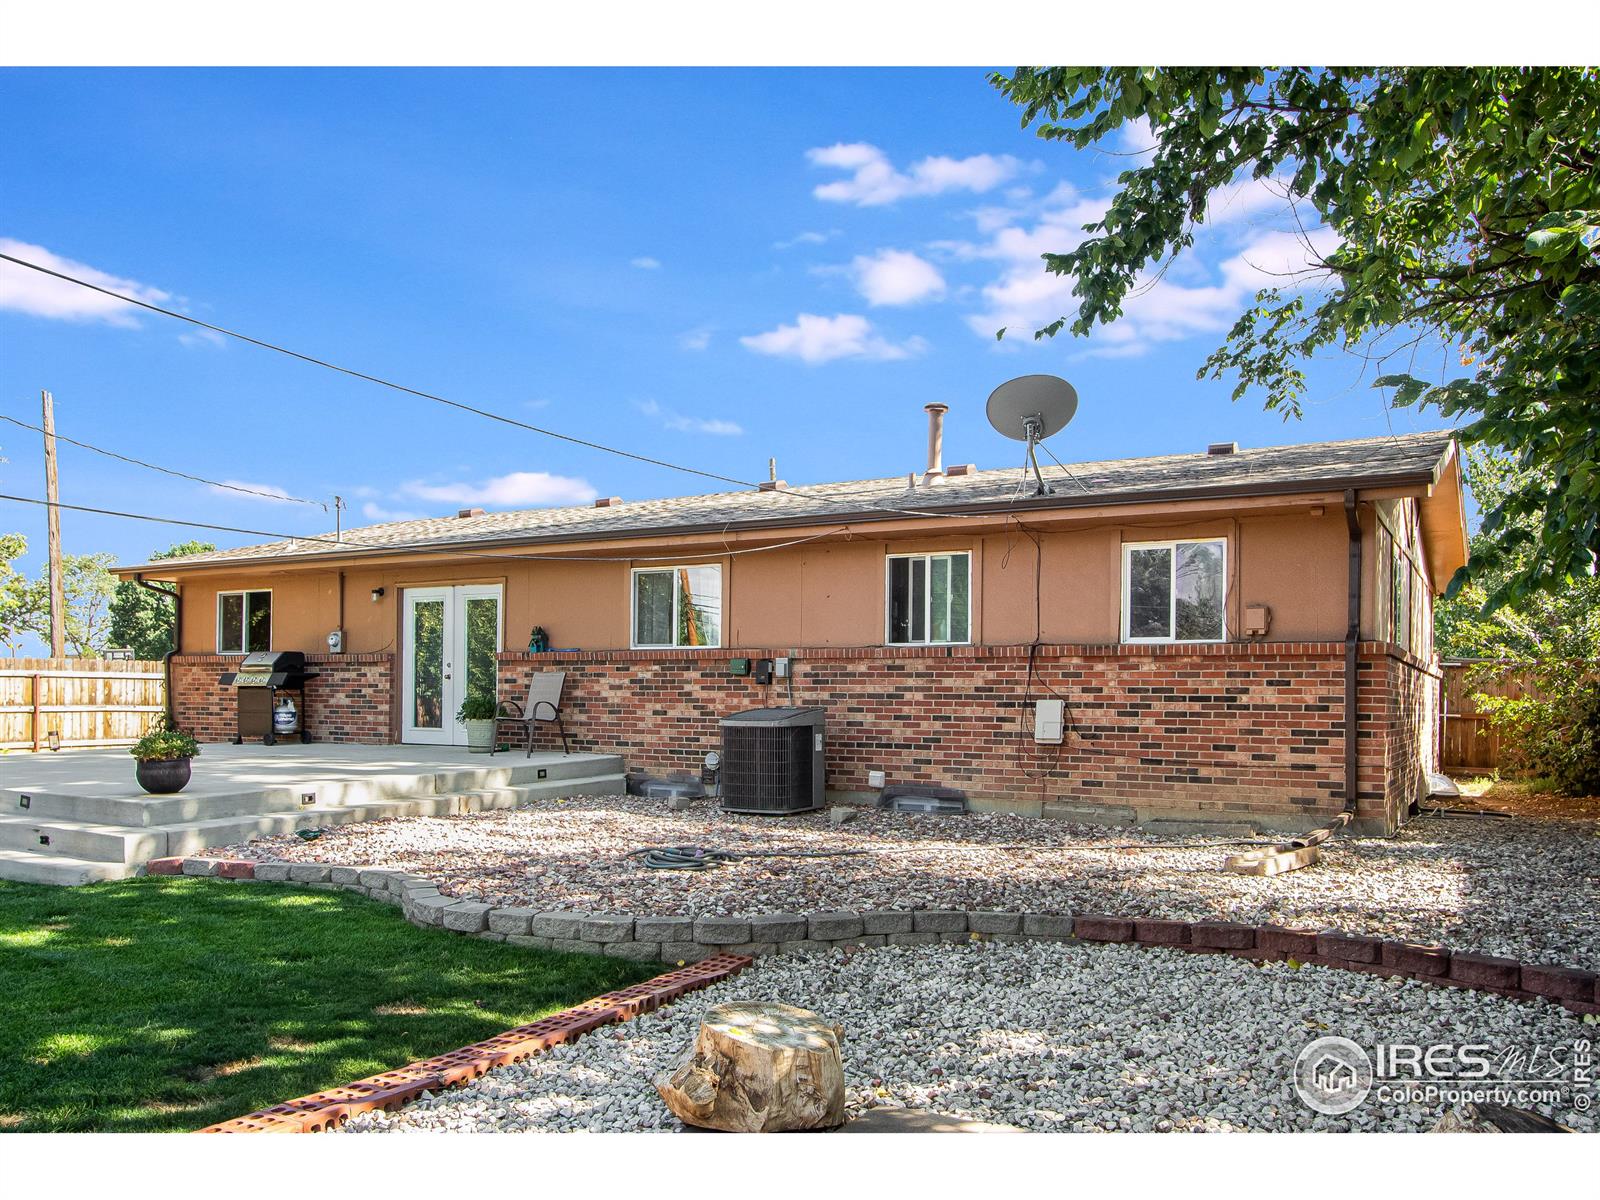 3105 13th, Greeley, CO